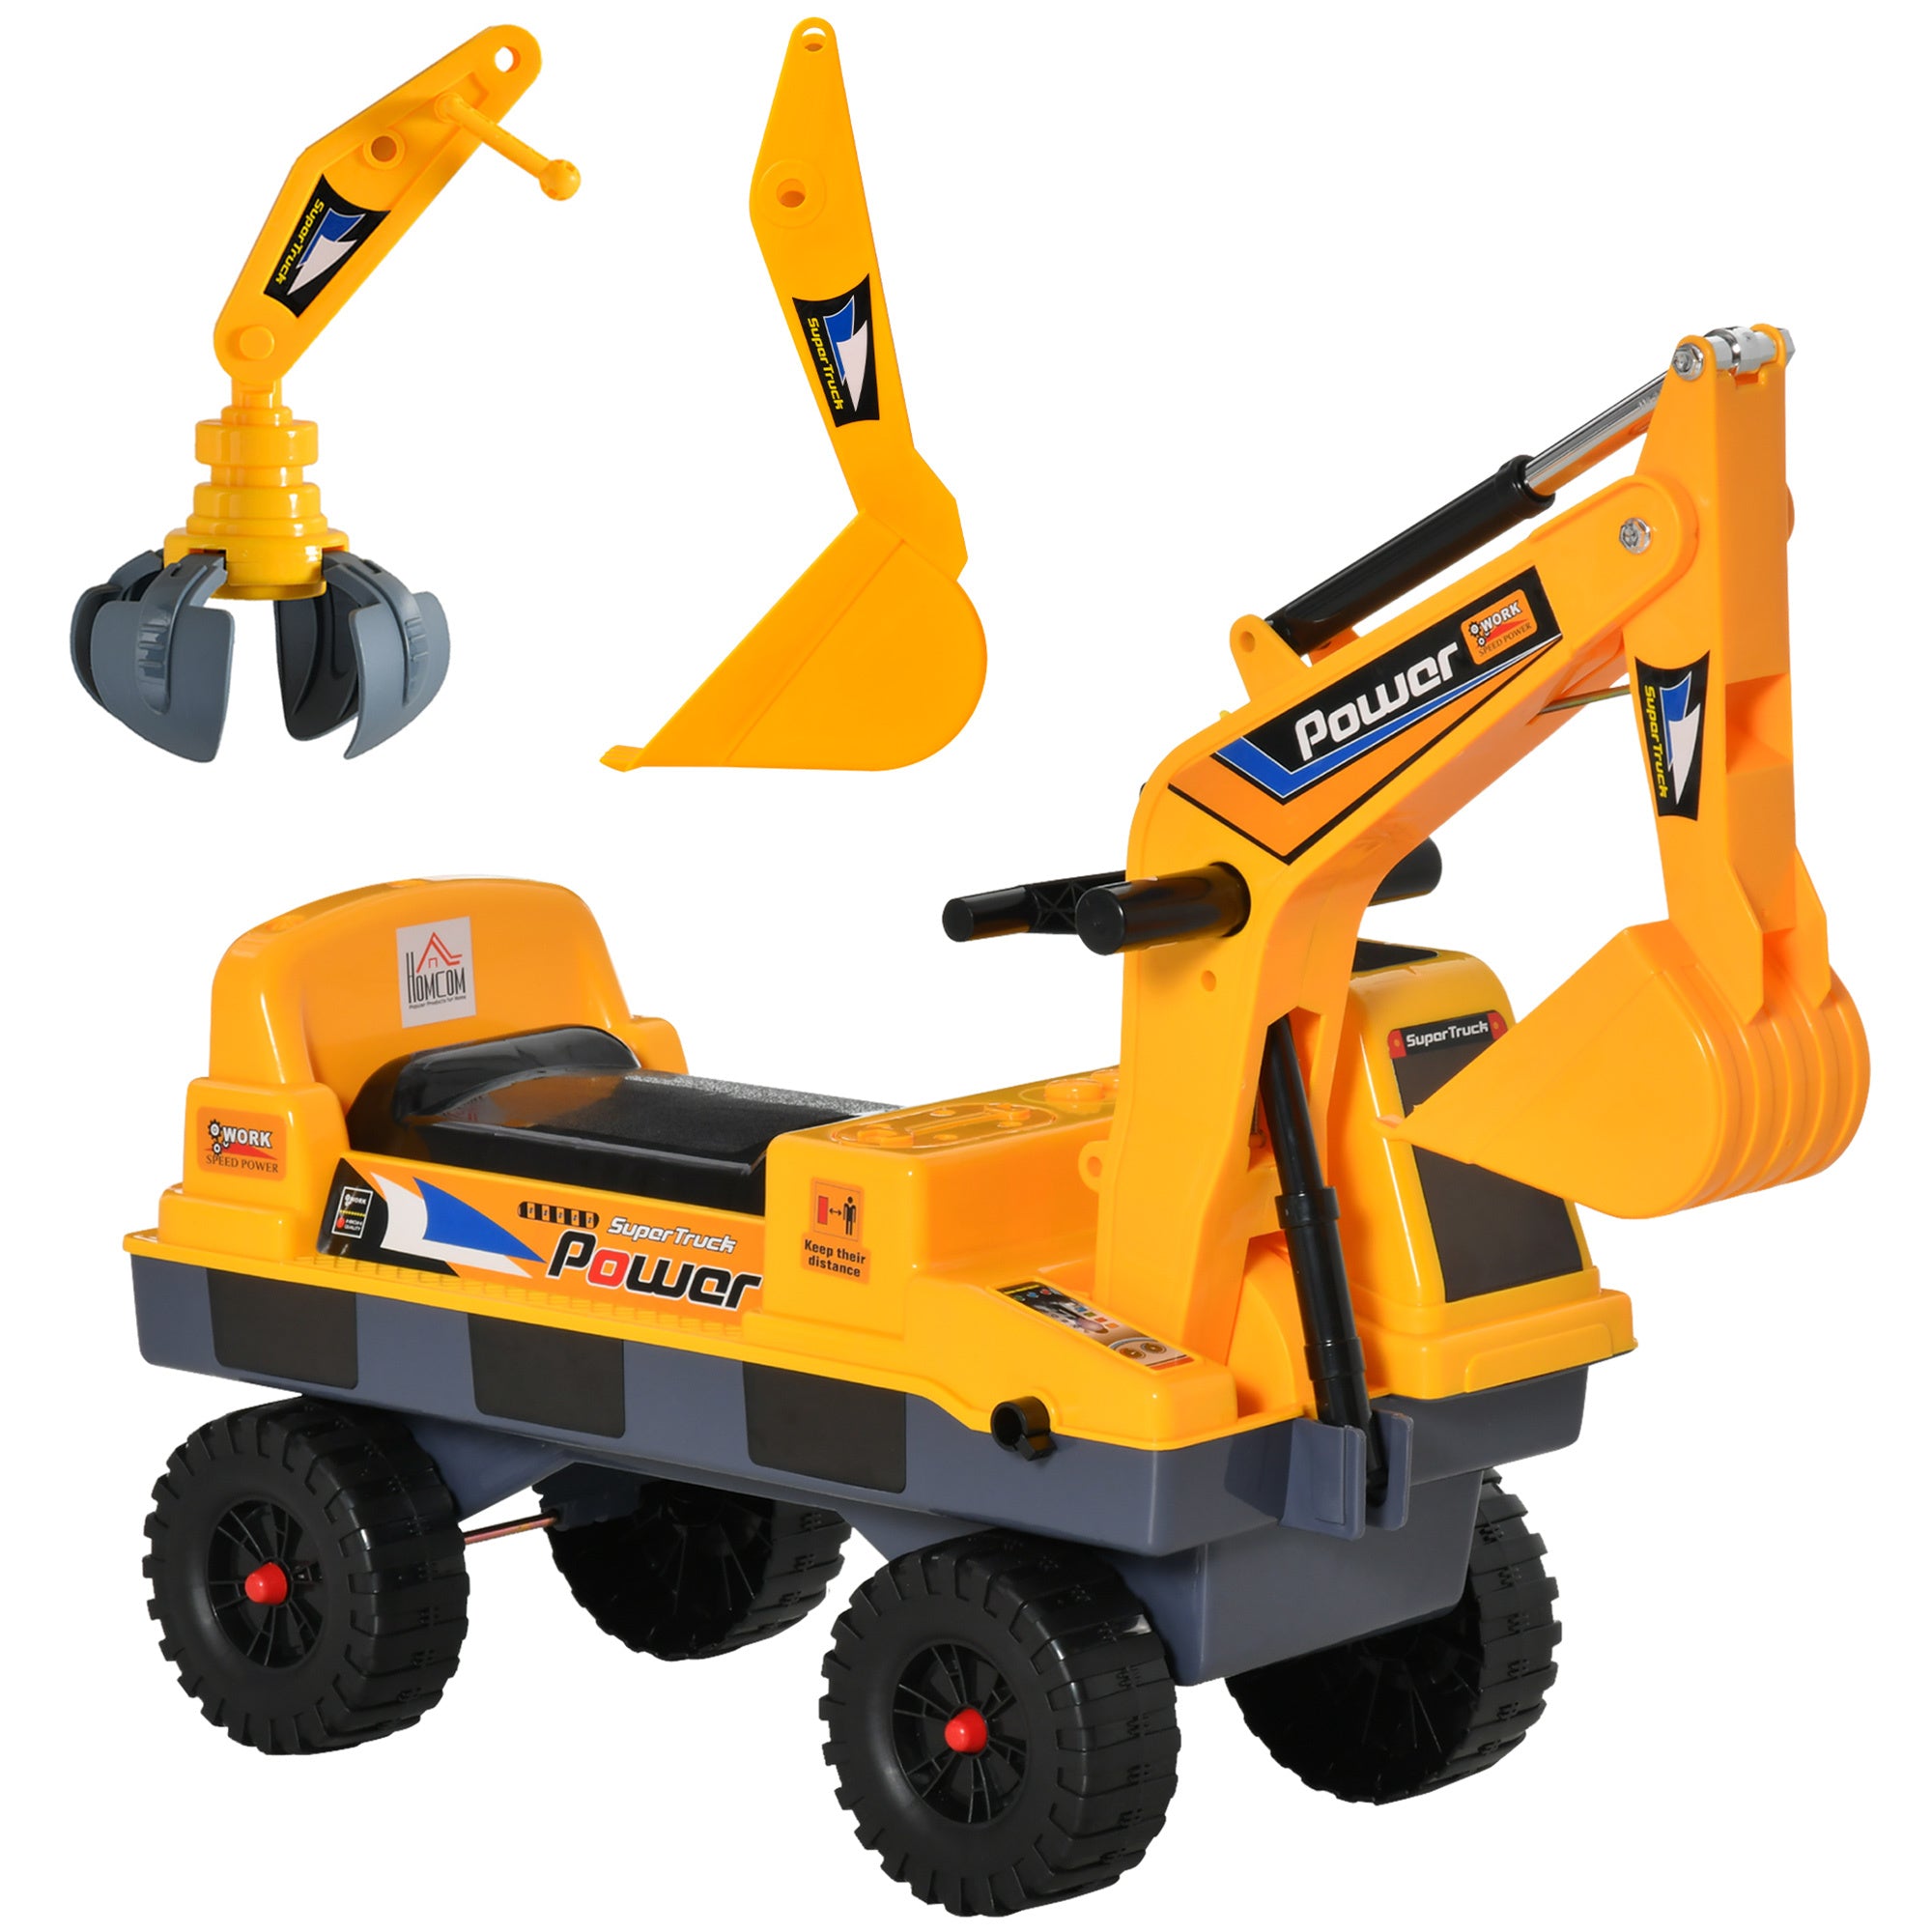 No Power 2 in 1 Ride On Excavator with Helmet and